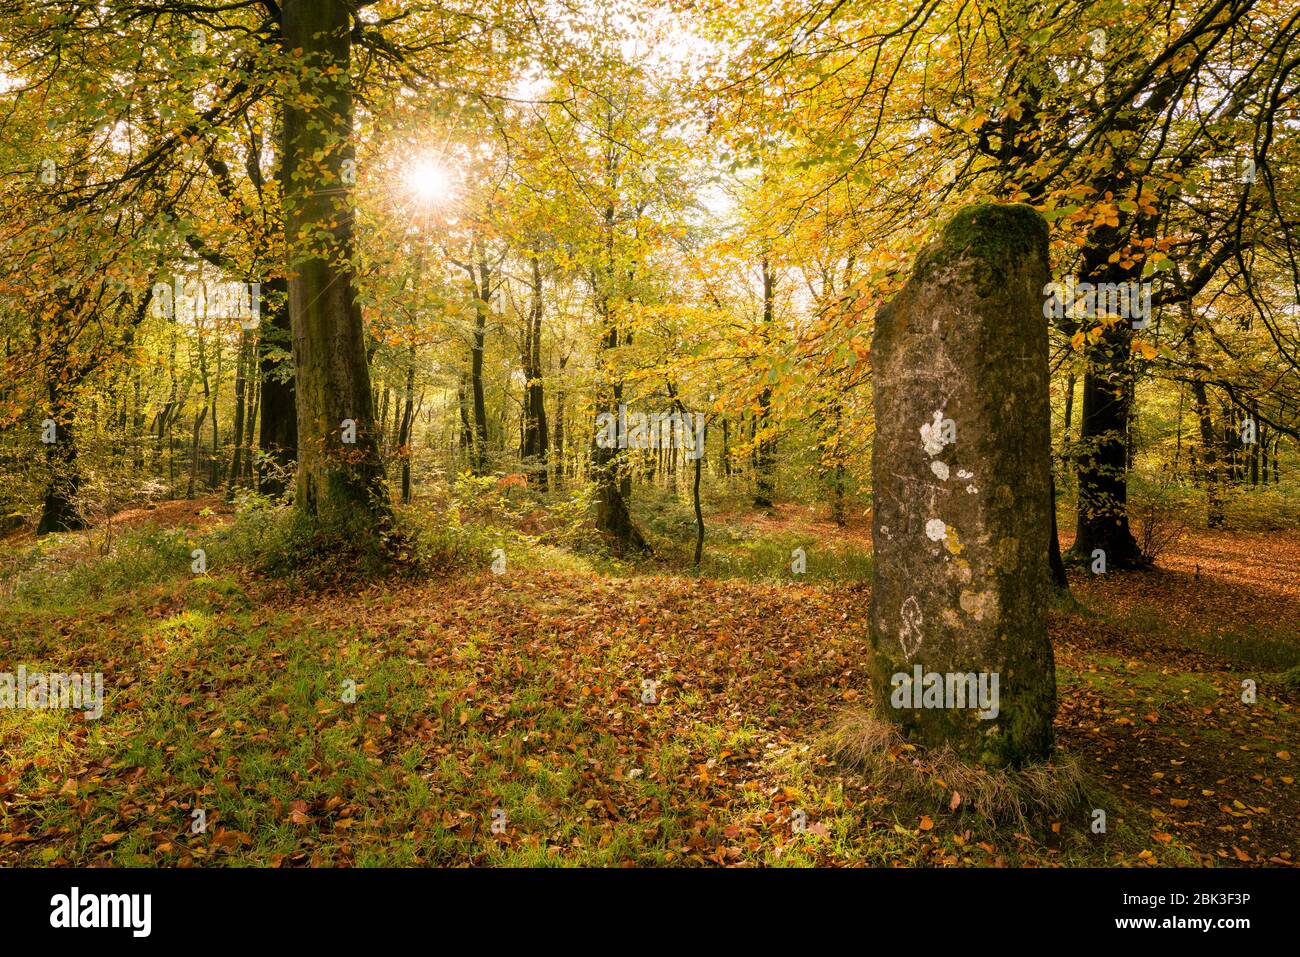 The Standing Stone in autumn in Beacon Hill Wood in the Mendip Hills, Somerset, England. Stock Photo